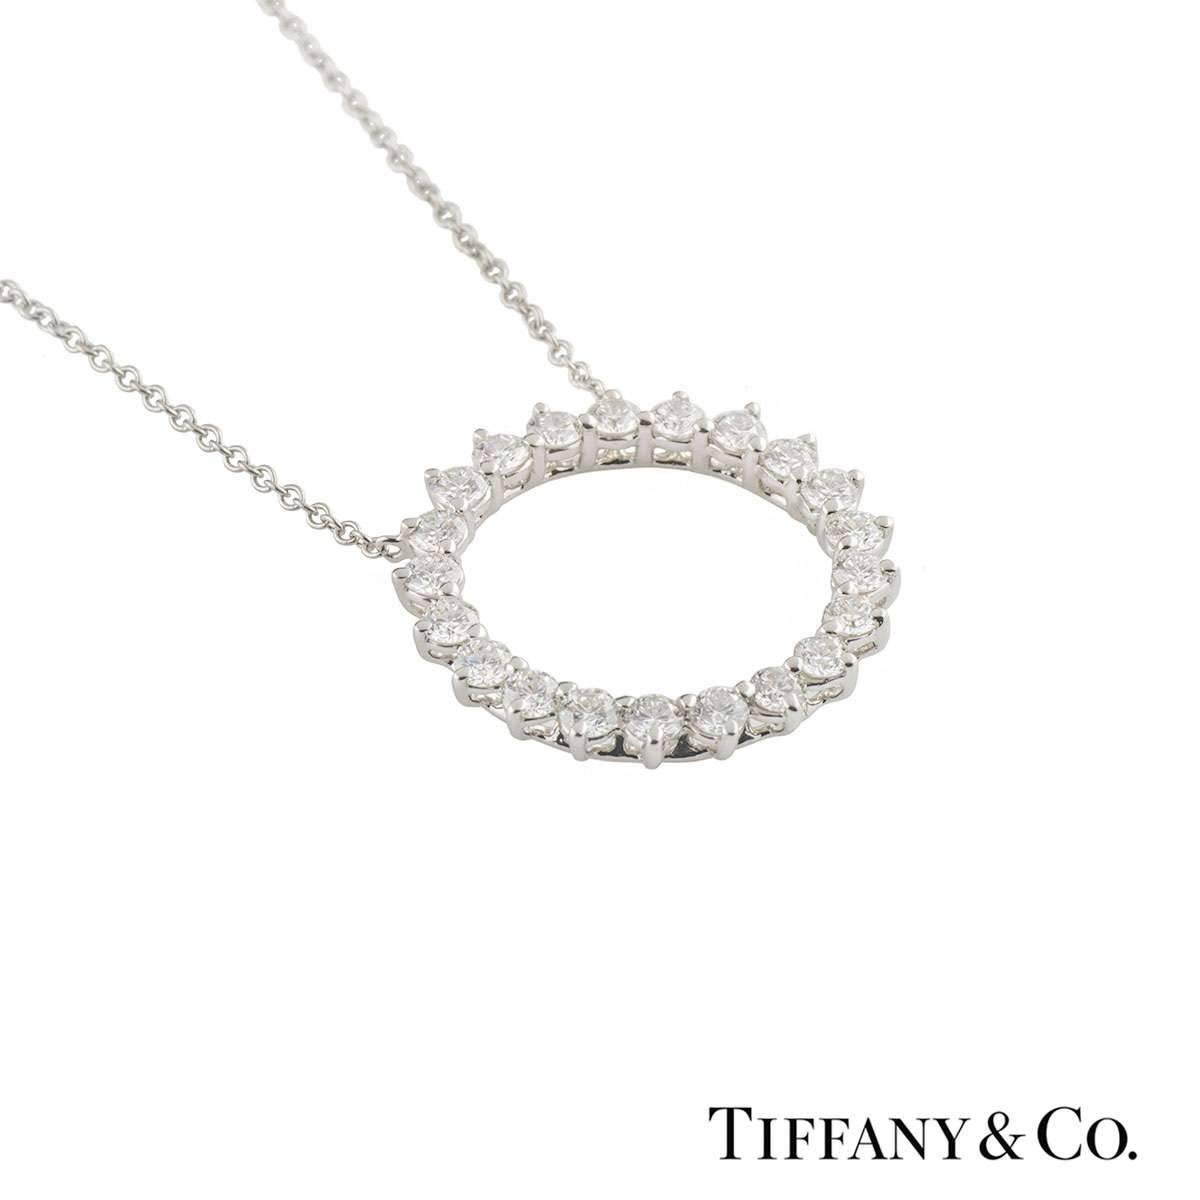 A stunning pendant in platinum from the Open Circle collection by Tiffany & Co. The openwork circular pendant consists of 21 round brilliant cut diamonds totalling 0.93ct, predominantly F colour and VS clarity. The motif measures 2cm in diameter